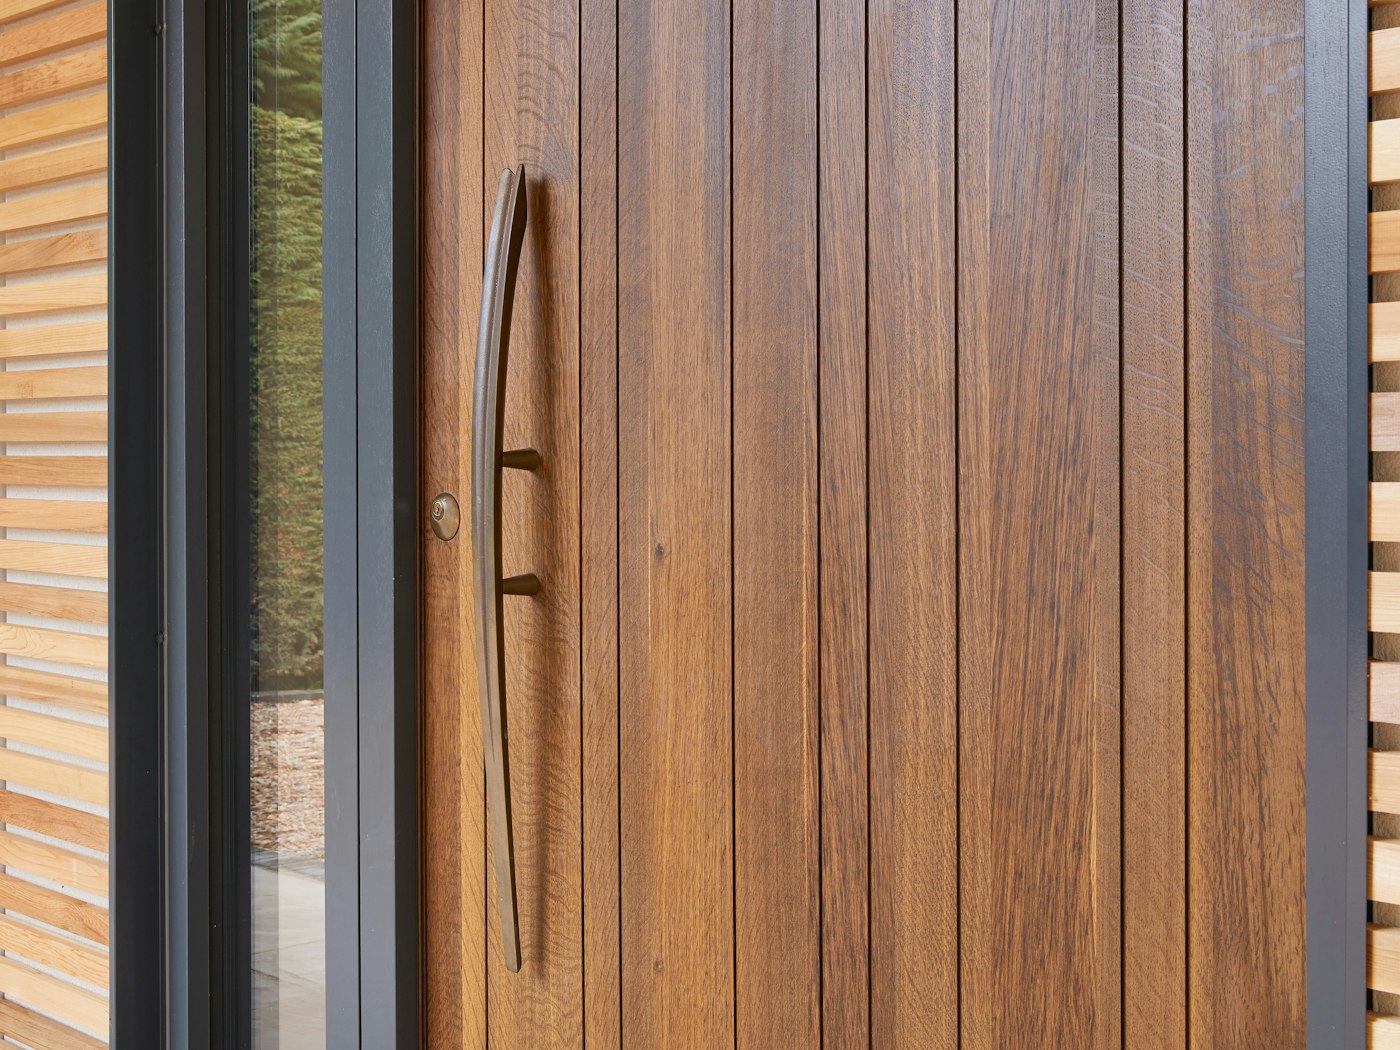 The richness of the fumed oak wood is seen in the grain detail and colour variations